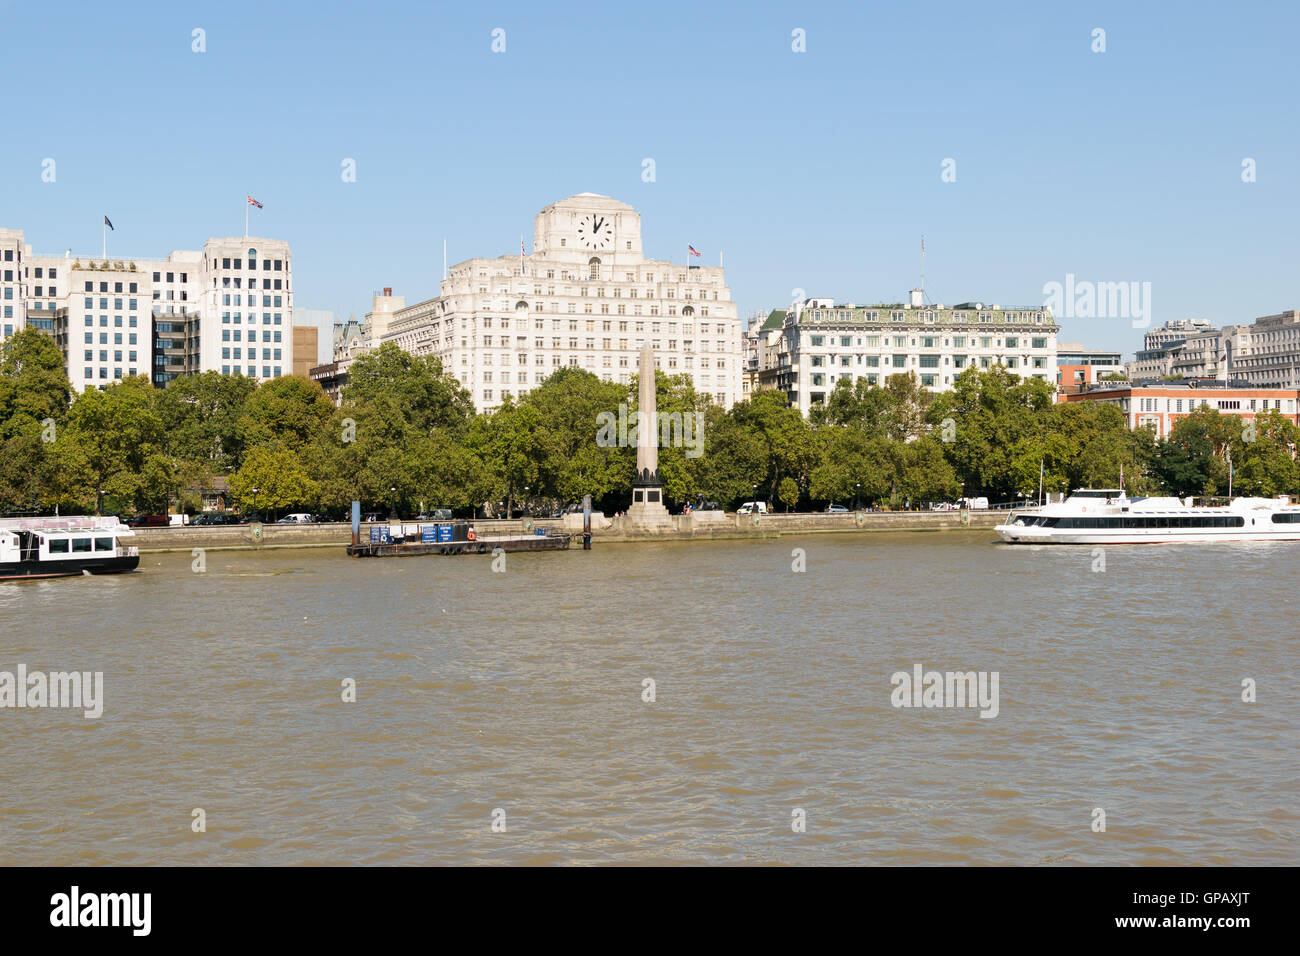 London, UK - 30 August 2016: View of Victoria Embankment on river Thames with Cleopatra's Needle in the middle. Stock Photo